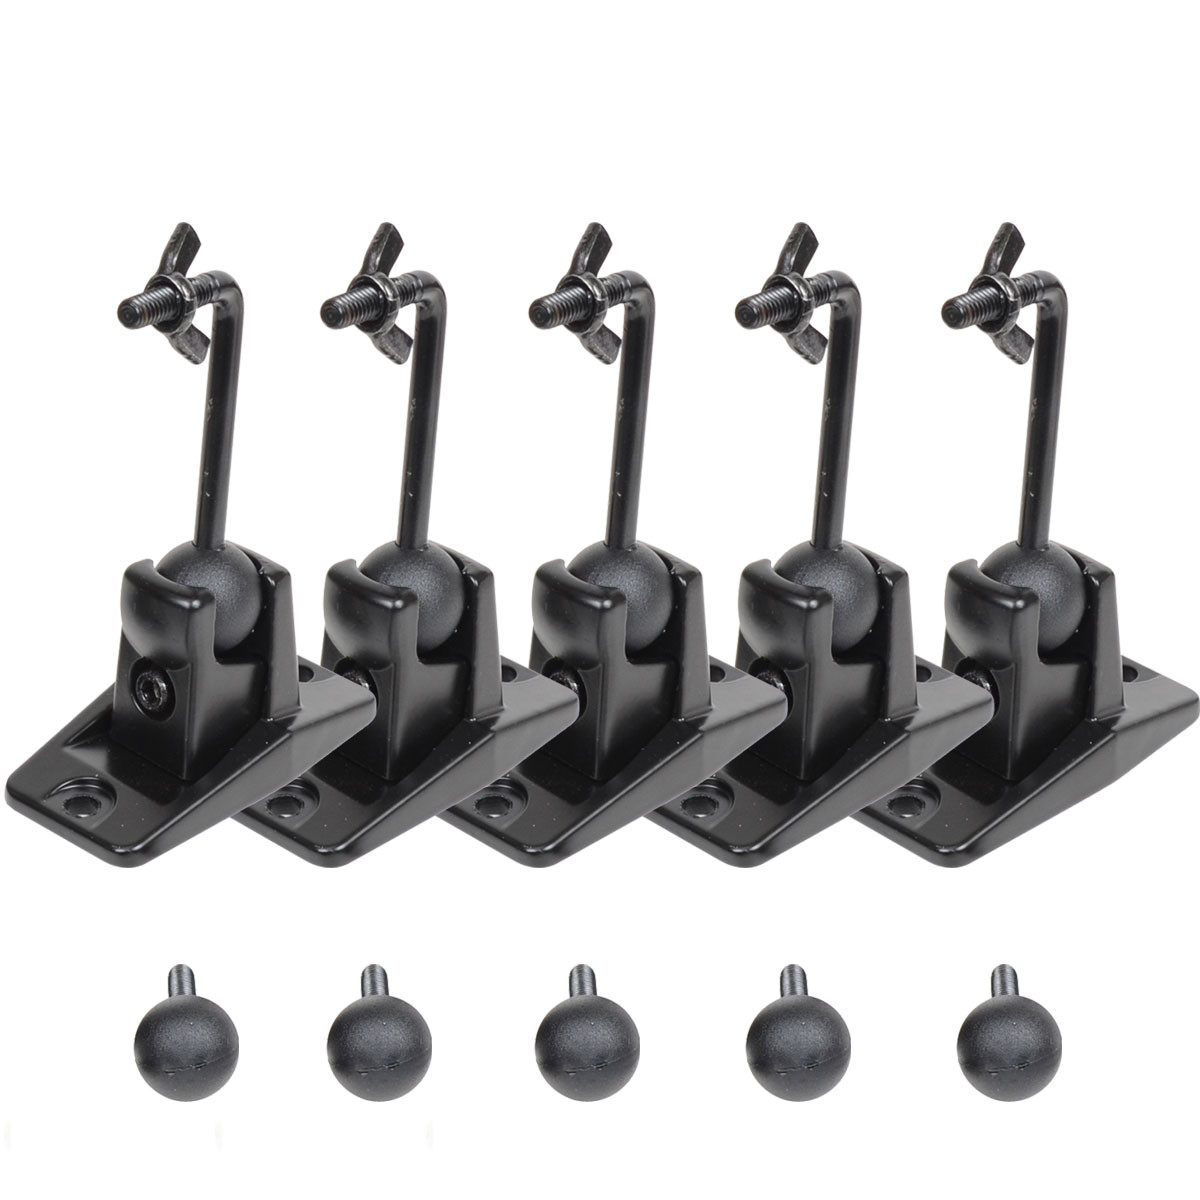 VideoSecu 5 Packs of Ceiling Wall Speaker Mount Satellite Surround Sound Home Theater Brackets bsn - image 1 of 4